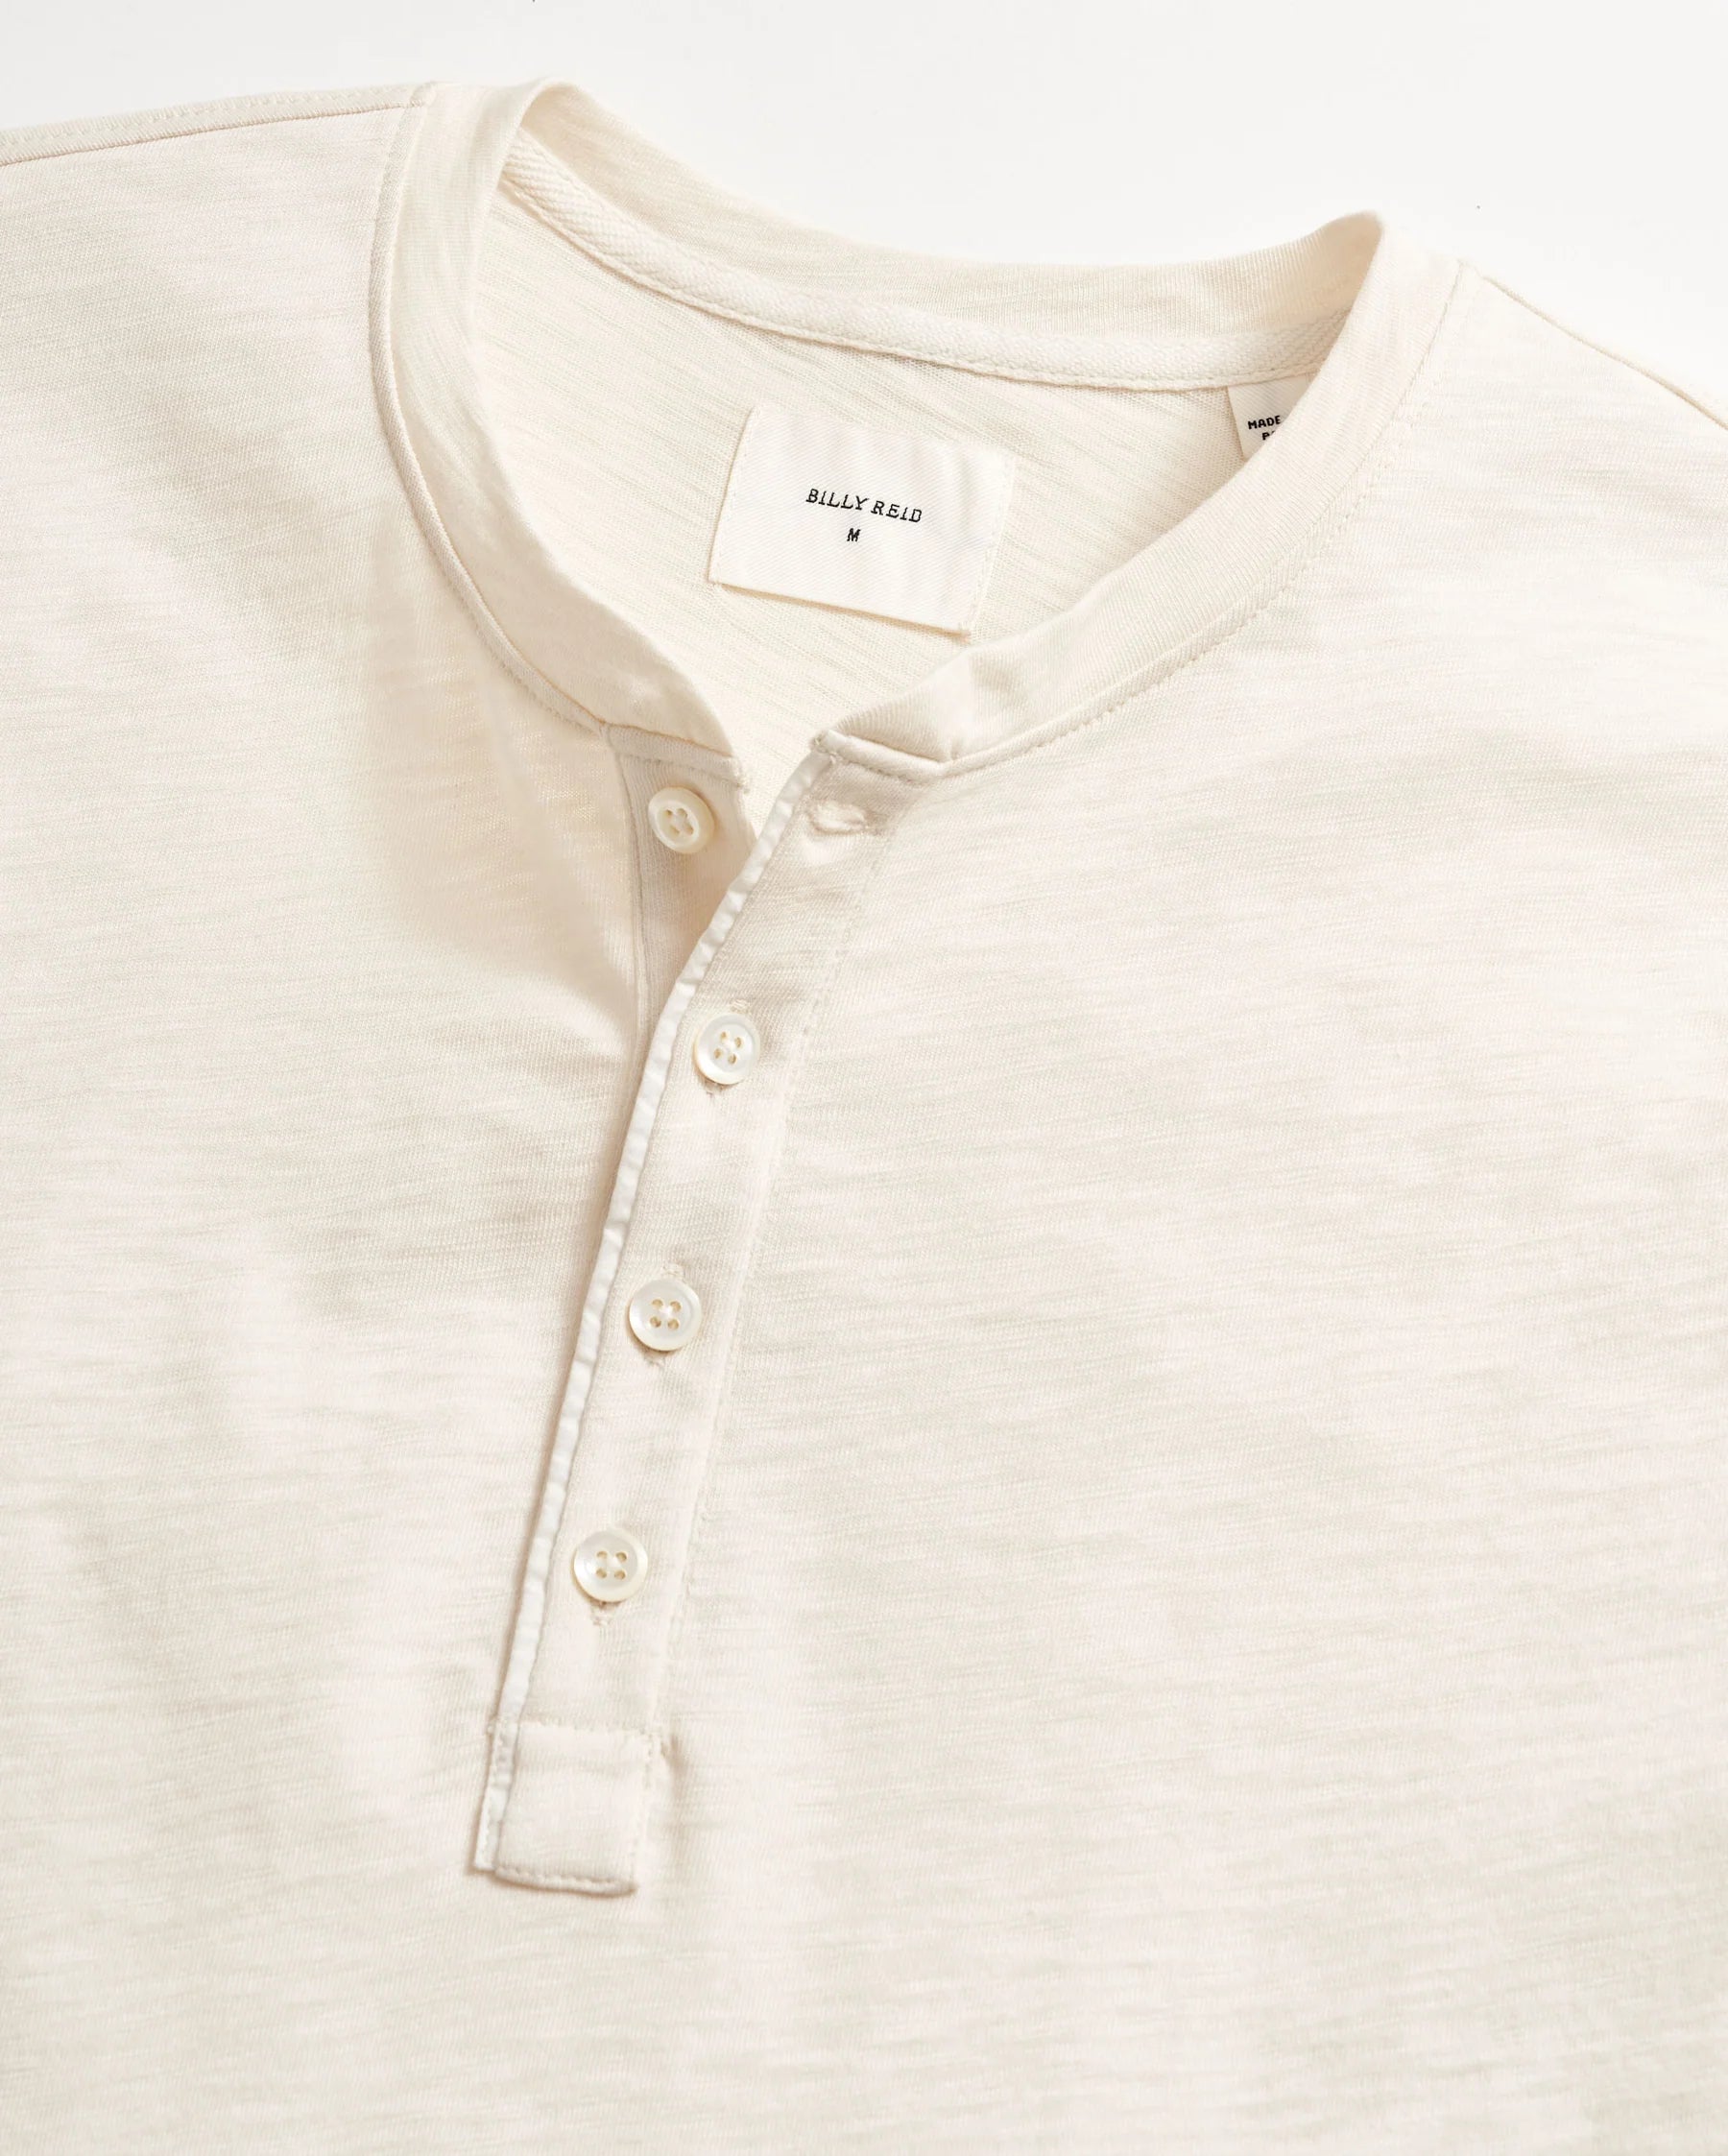 L/S ORGANIC COTTON HENLEY - TINTED WHITE